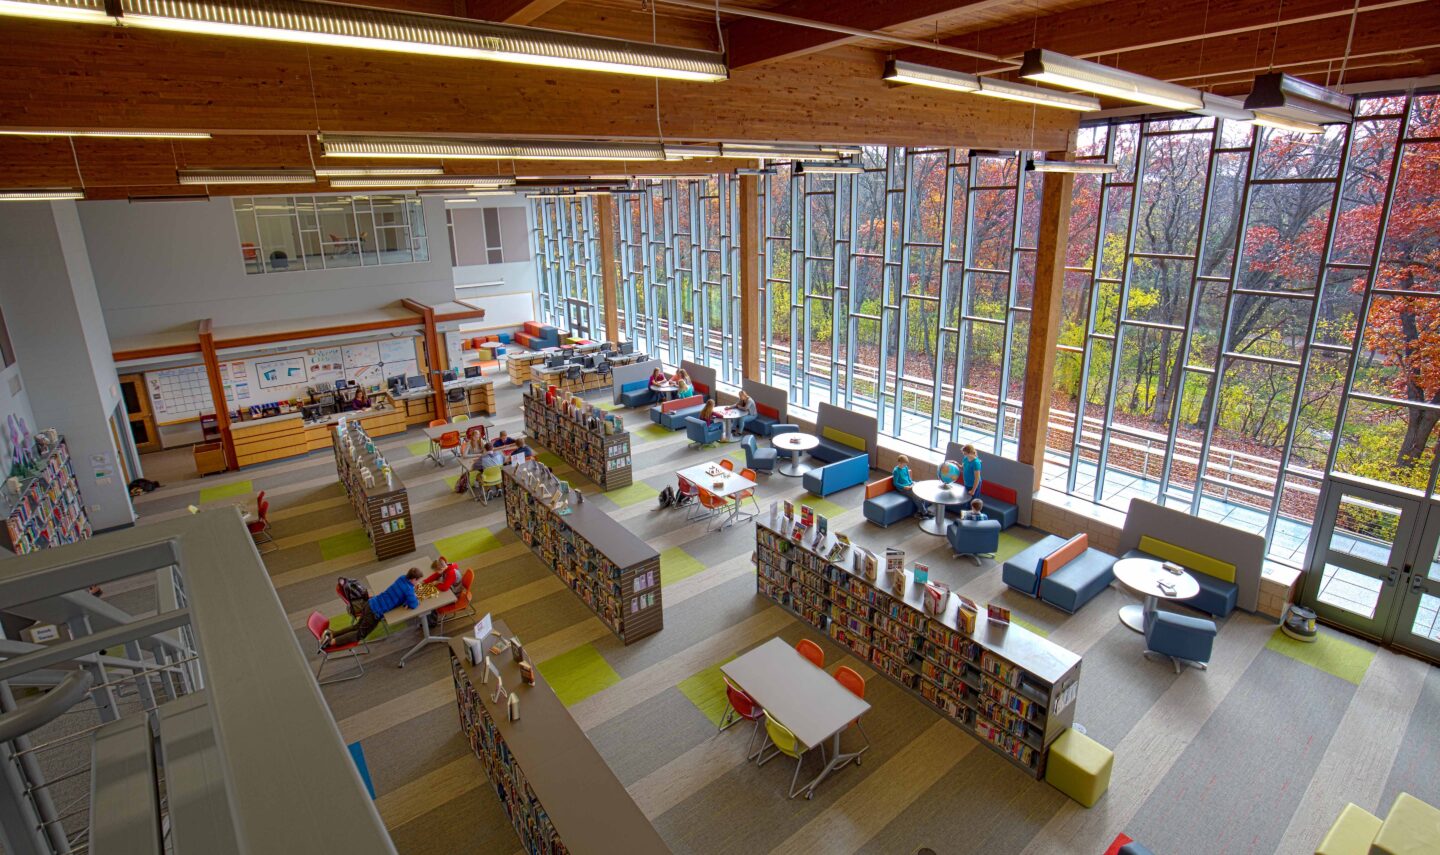 Kromery Middle School Library designed by Bray Architects